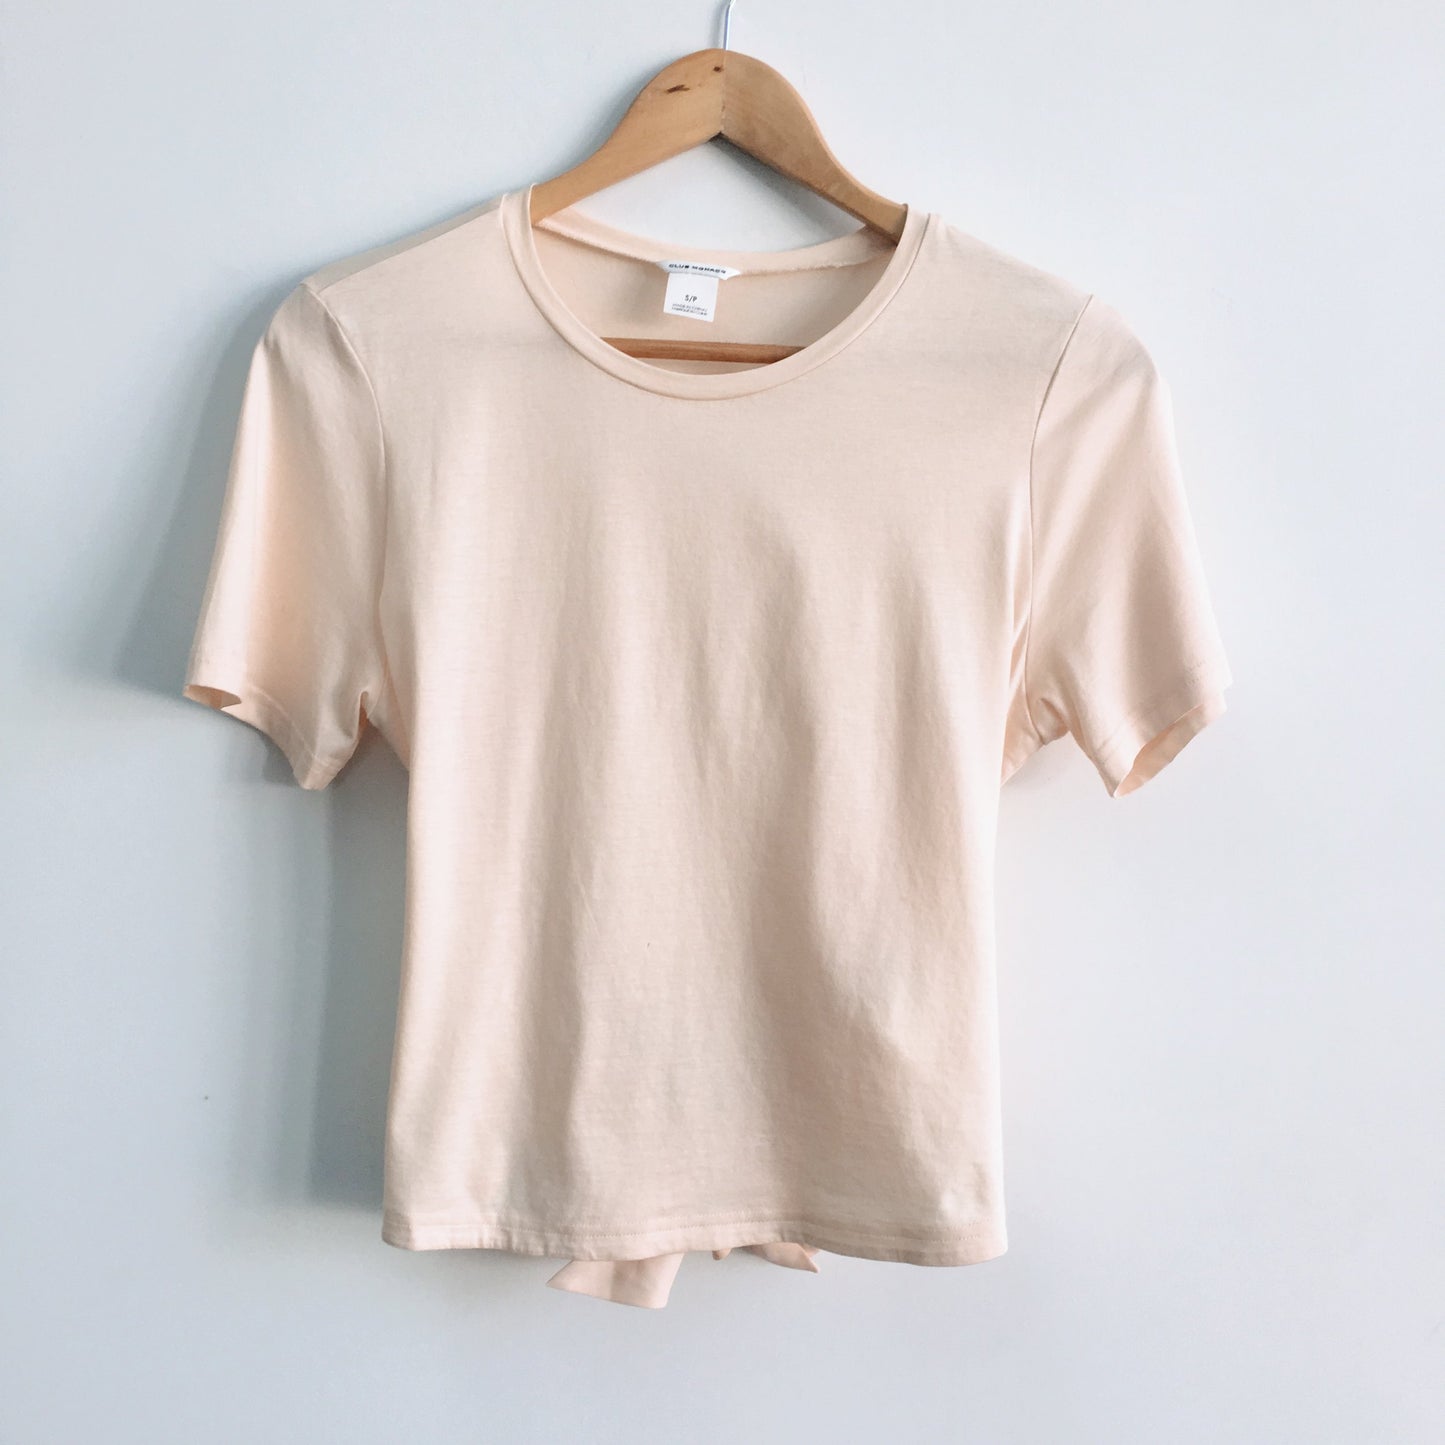 Club Monaco T-shirt with Tie-back - size Small